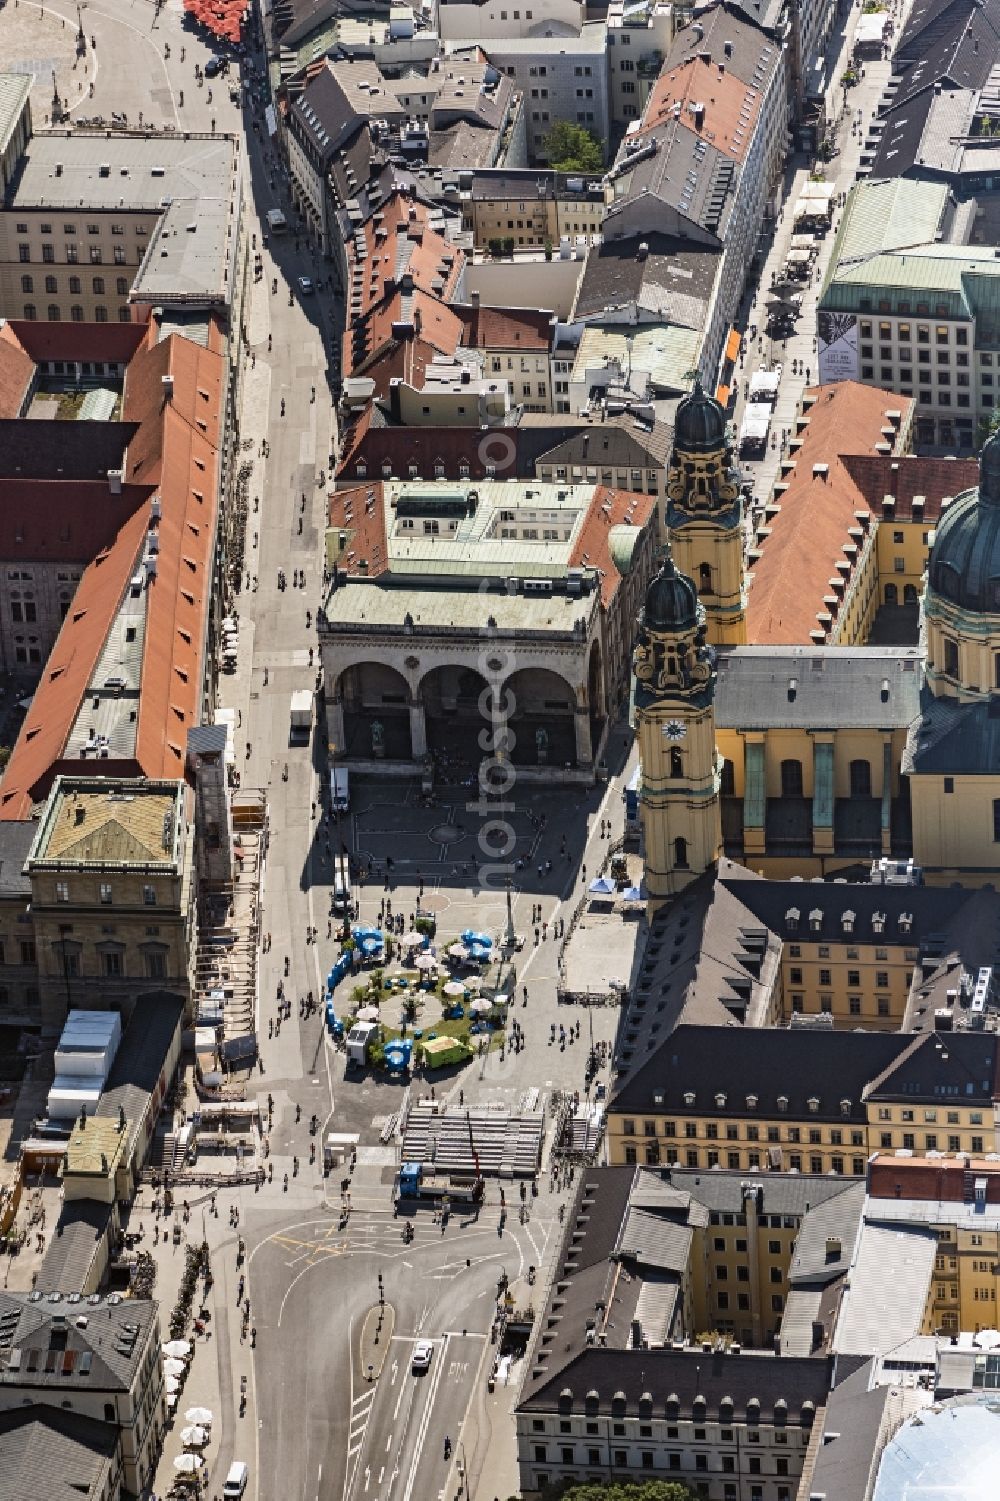 München from the bird's eye view: Feldherrnhalle and Theatine Church of St. Cajetan on the square Odeonsplatz in the Maxvorstadt part of Munich in the state of Bavaria. The Feldherrnhalle ( Field Marshals' Hall) is a monumental loggia on the southern edge of the square. Next to it is the catholic church, a former court and royal church of the Theatine Order. With its two towers in the italian late baroque style, it is part of the Odeon's Square complex of buildings and landmarks